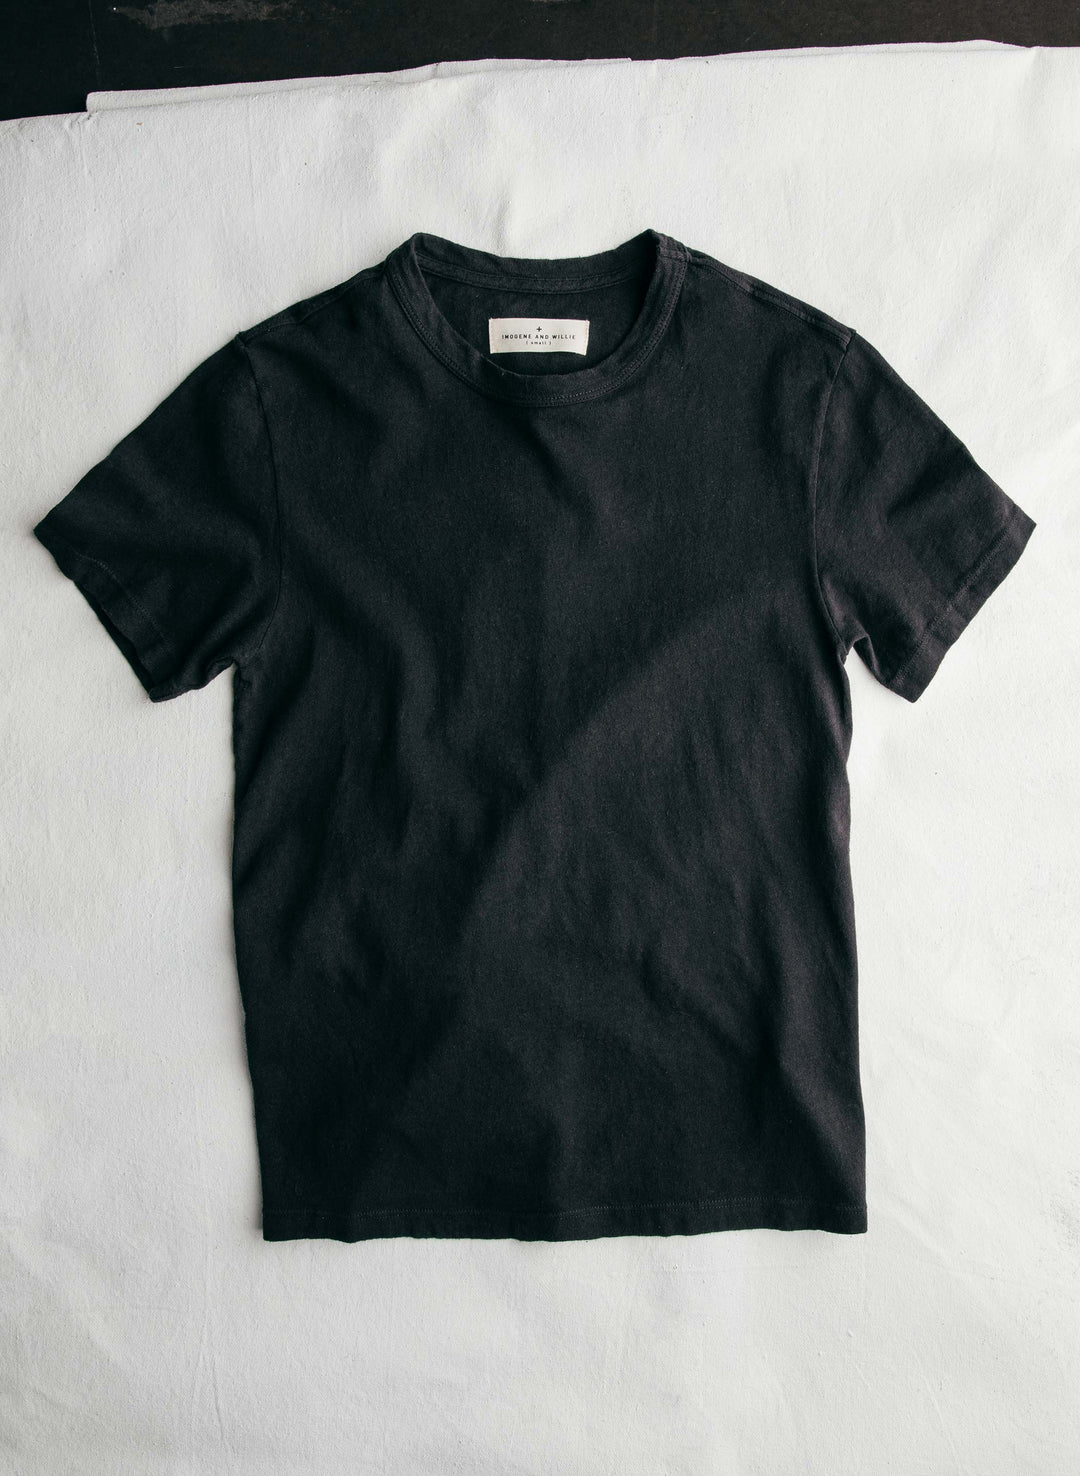 a black t-shirt on a white surface